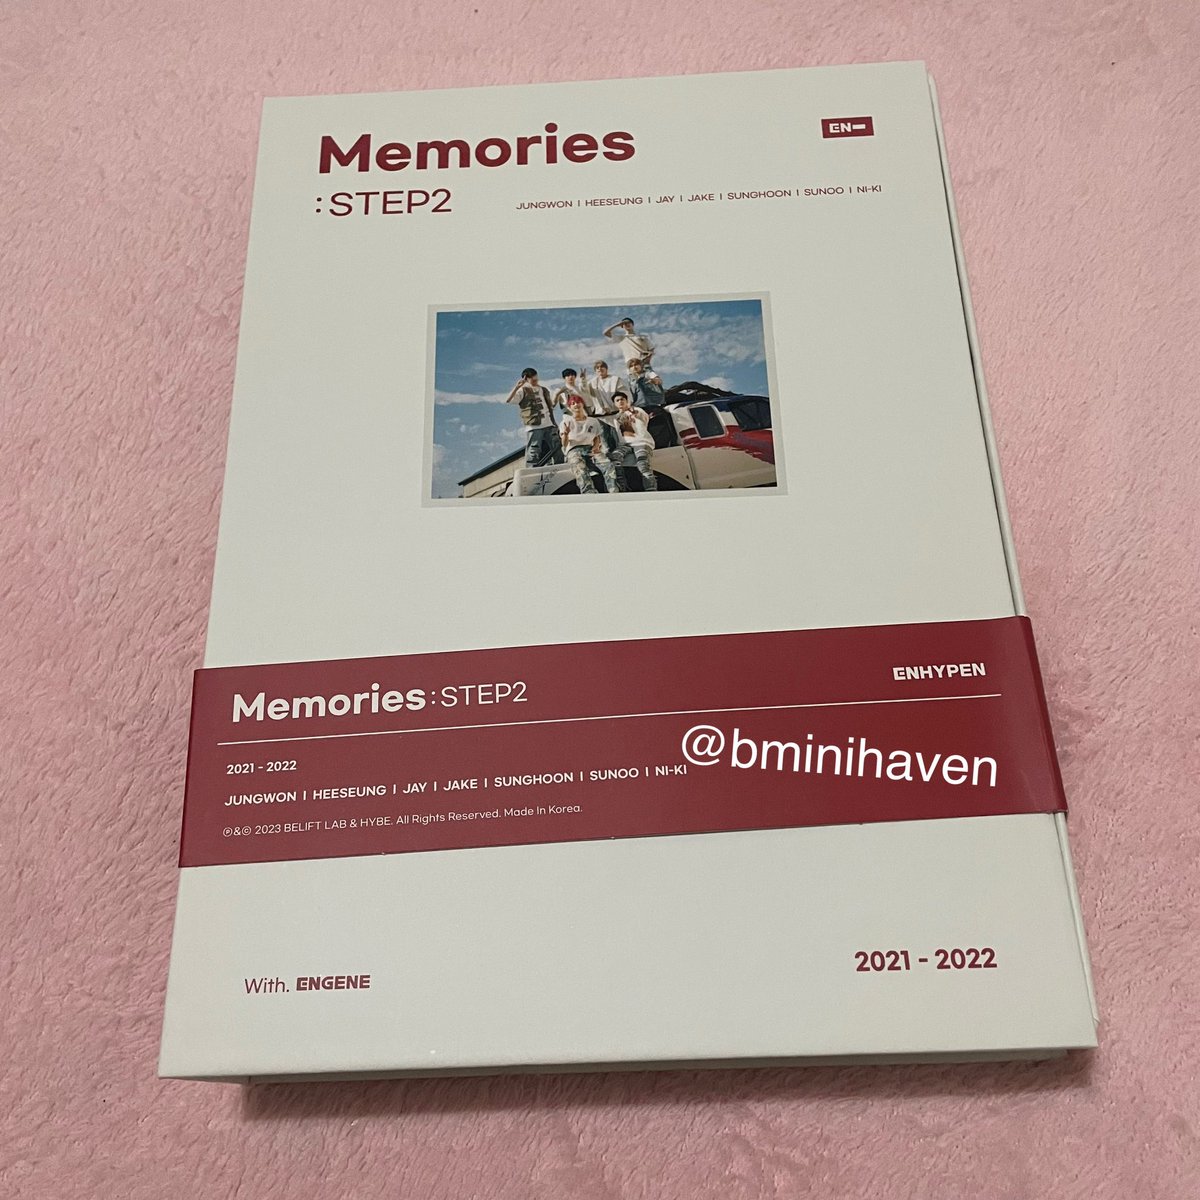 WTS LFB Memories Step2 Dvd set

🏷 ₱750 all in 
📍 full inclusions except rpc
📍 payo or installment +50
📍 ₱300 dp bal aug 15
📍on hand
📍mint 10/10

Comment Mine